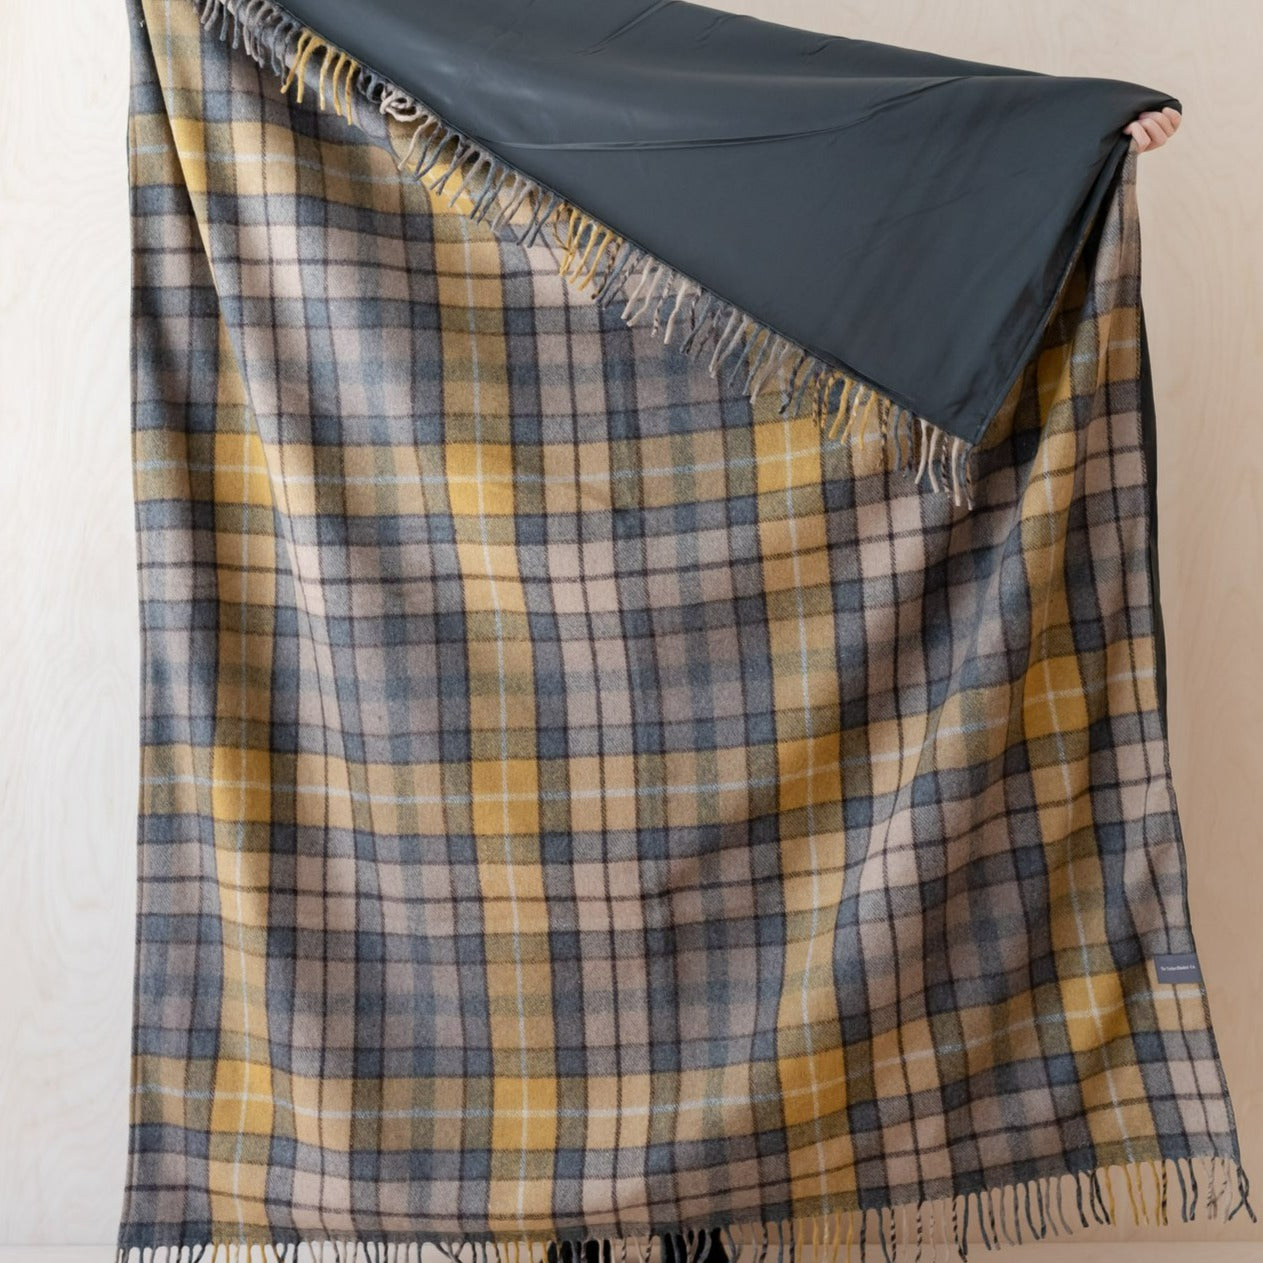 WATERPROOF Backed Wool Picnic Rug / Blanket in Classic Country Plaid Check  with Webbing Carry Strap